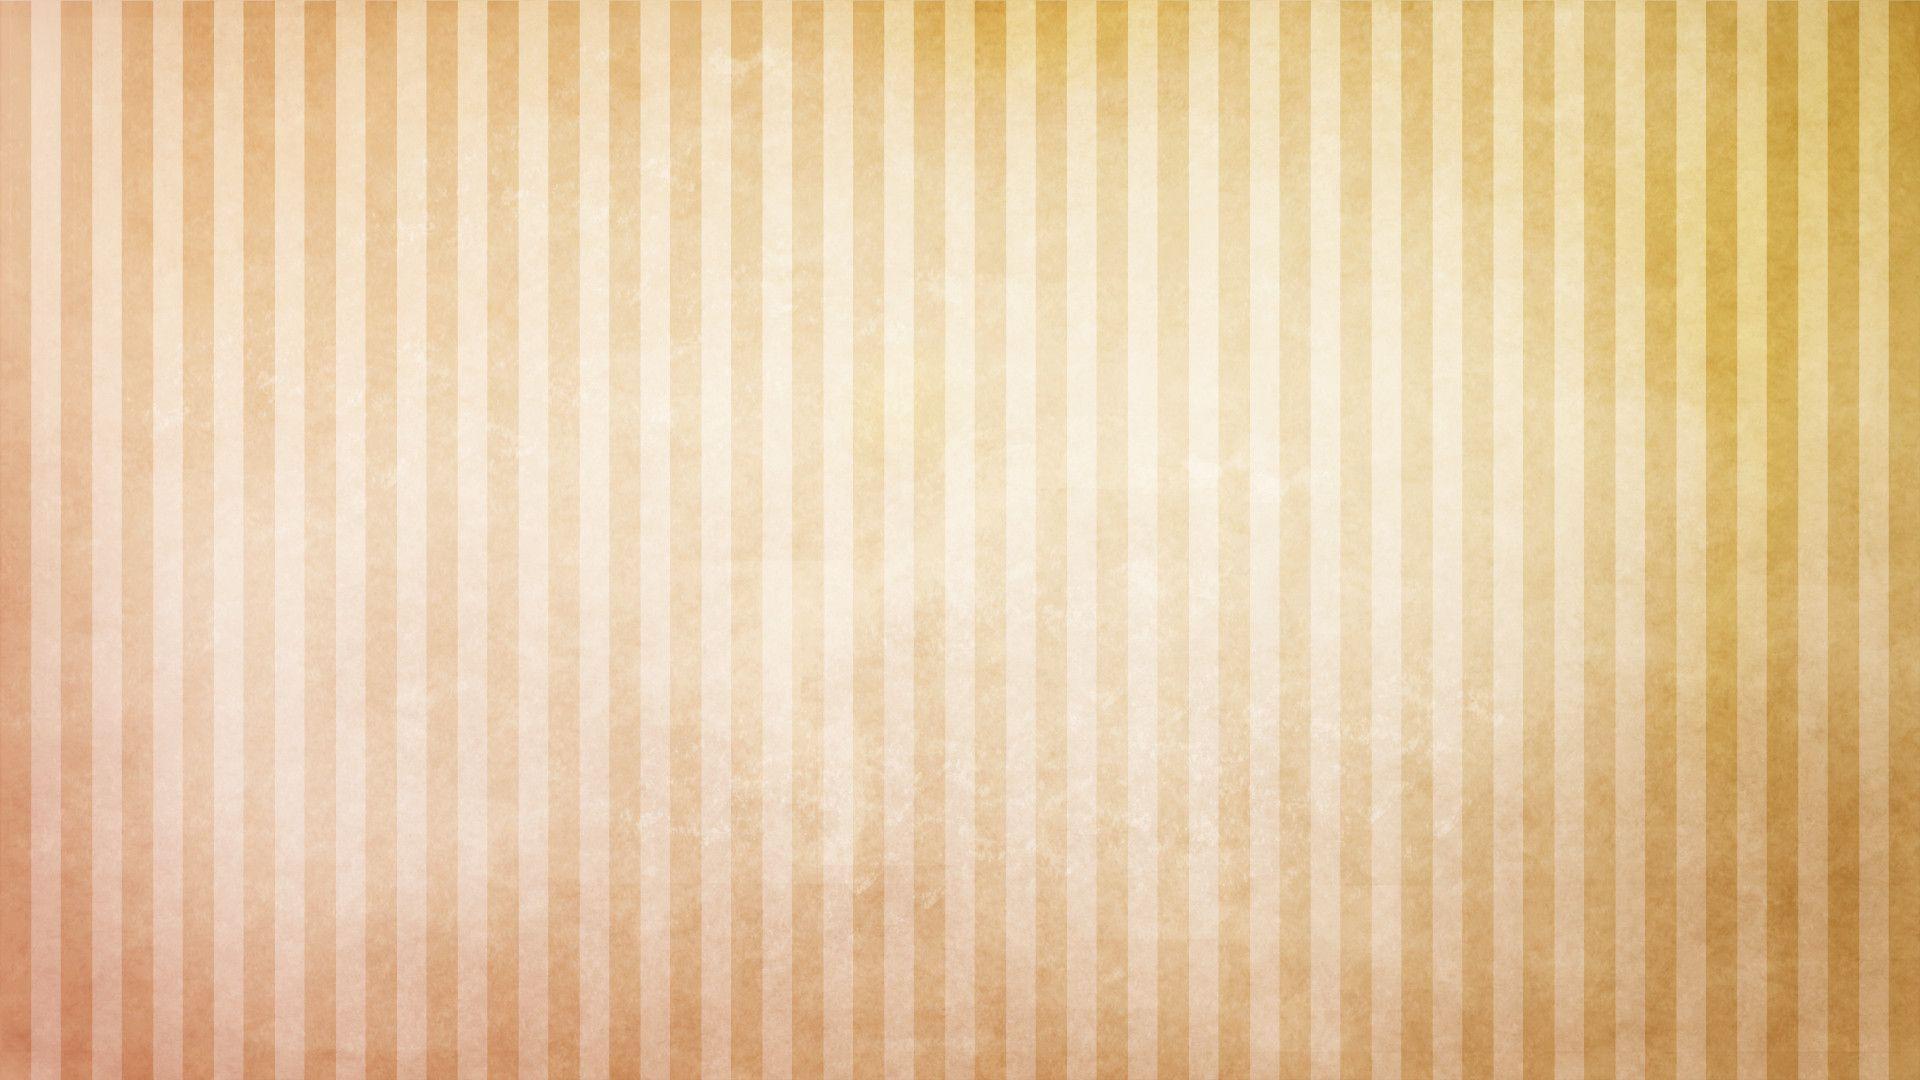 Free Stock Textures Free High Quality Stock Textures Free